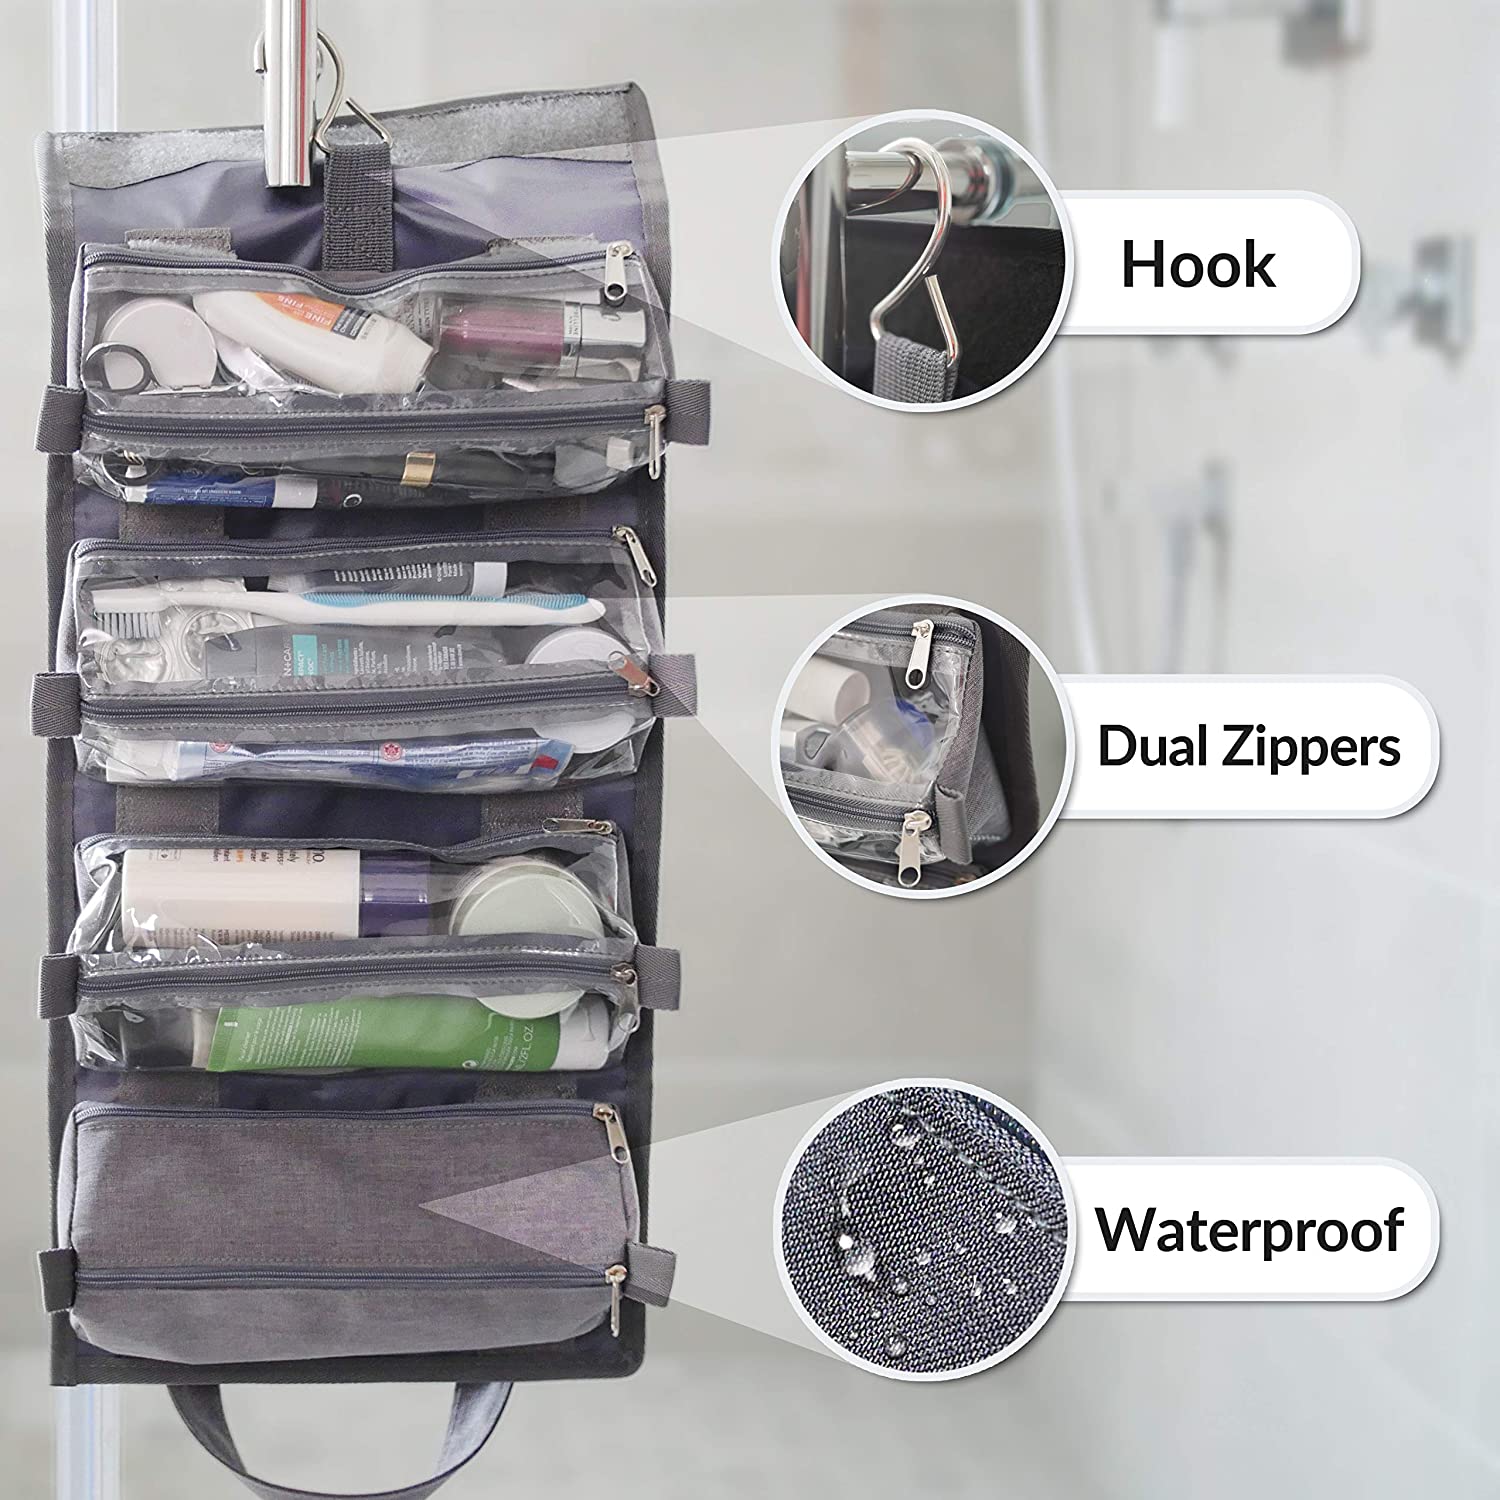 Roll Up Compact Cosmetic Kit with Hook  Ultralight Waterproof Fabric Hanging Toiletry Travel Bag Organizer for Men & Women